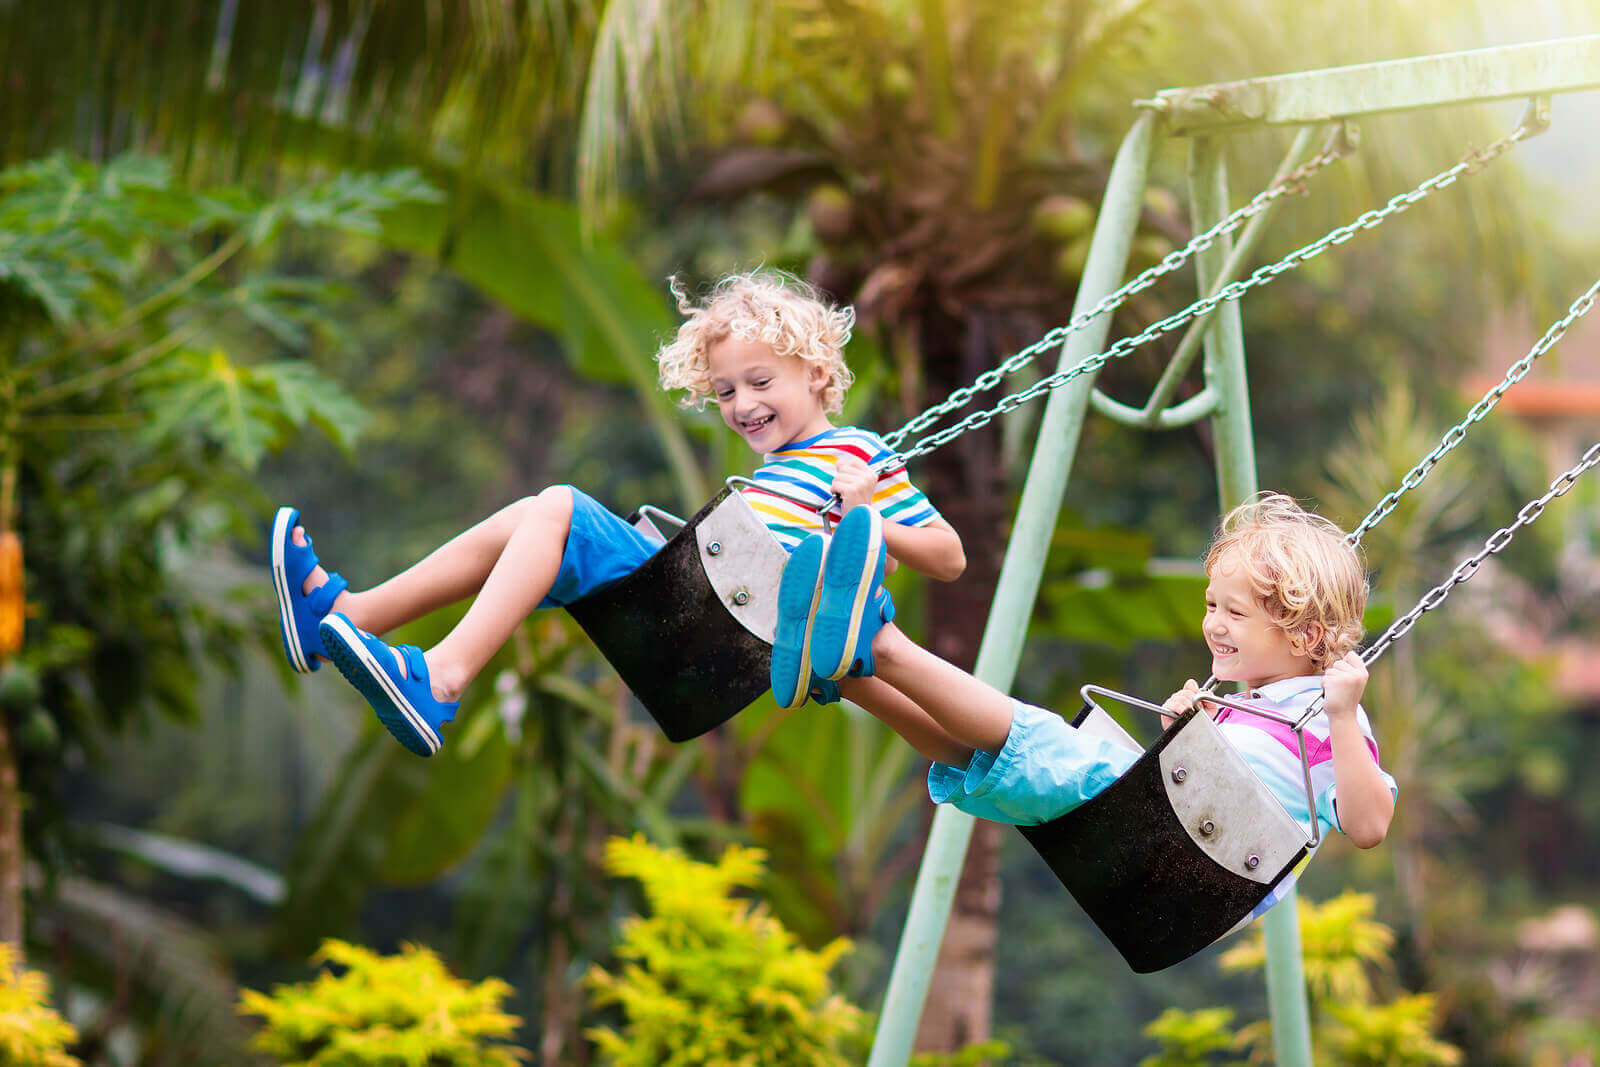 Two brothers swinging on a swingset.